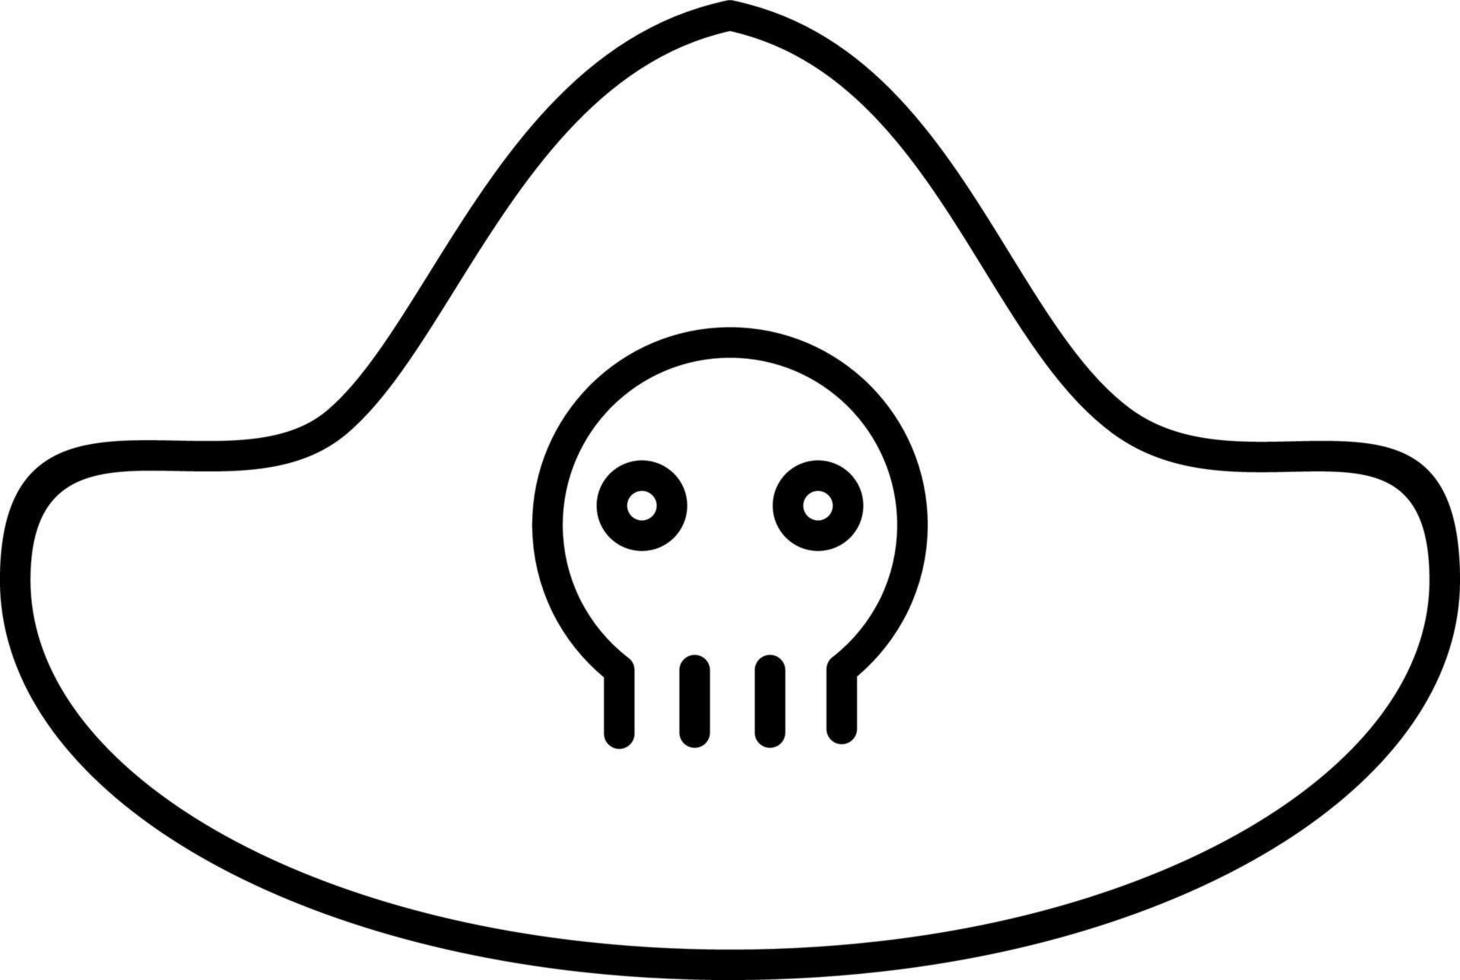 Pirate Hat Line Icon vector